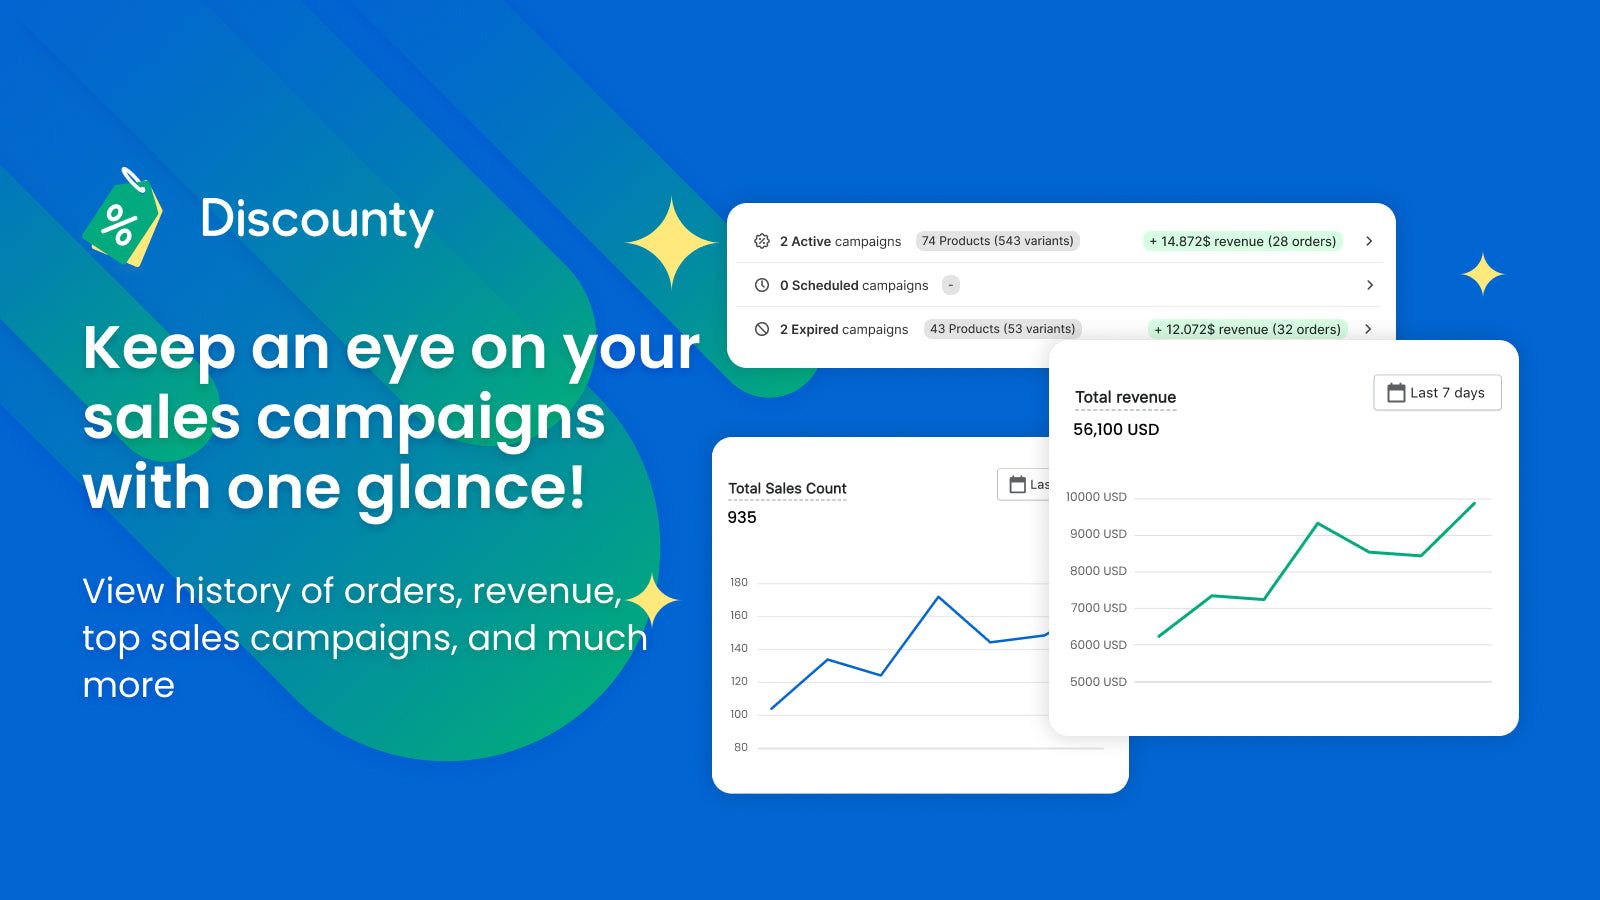 Keep an eye on your sales campaigns with one glance